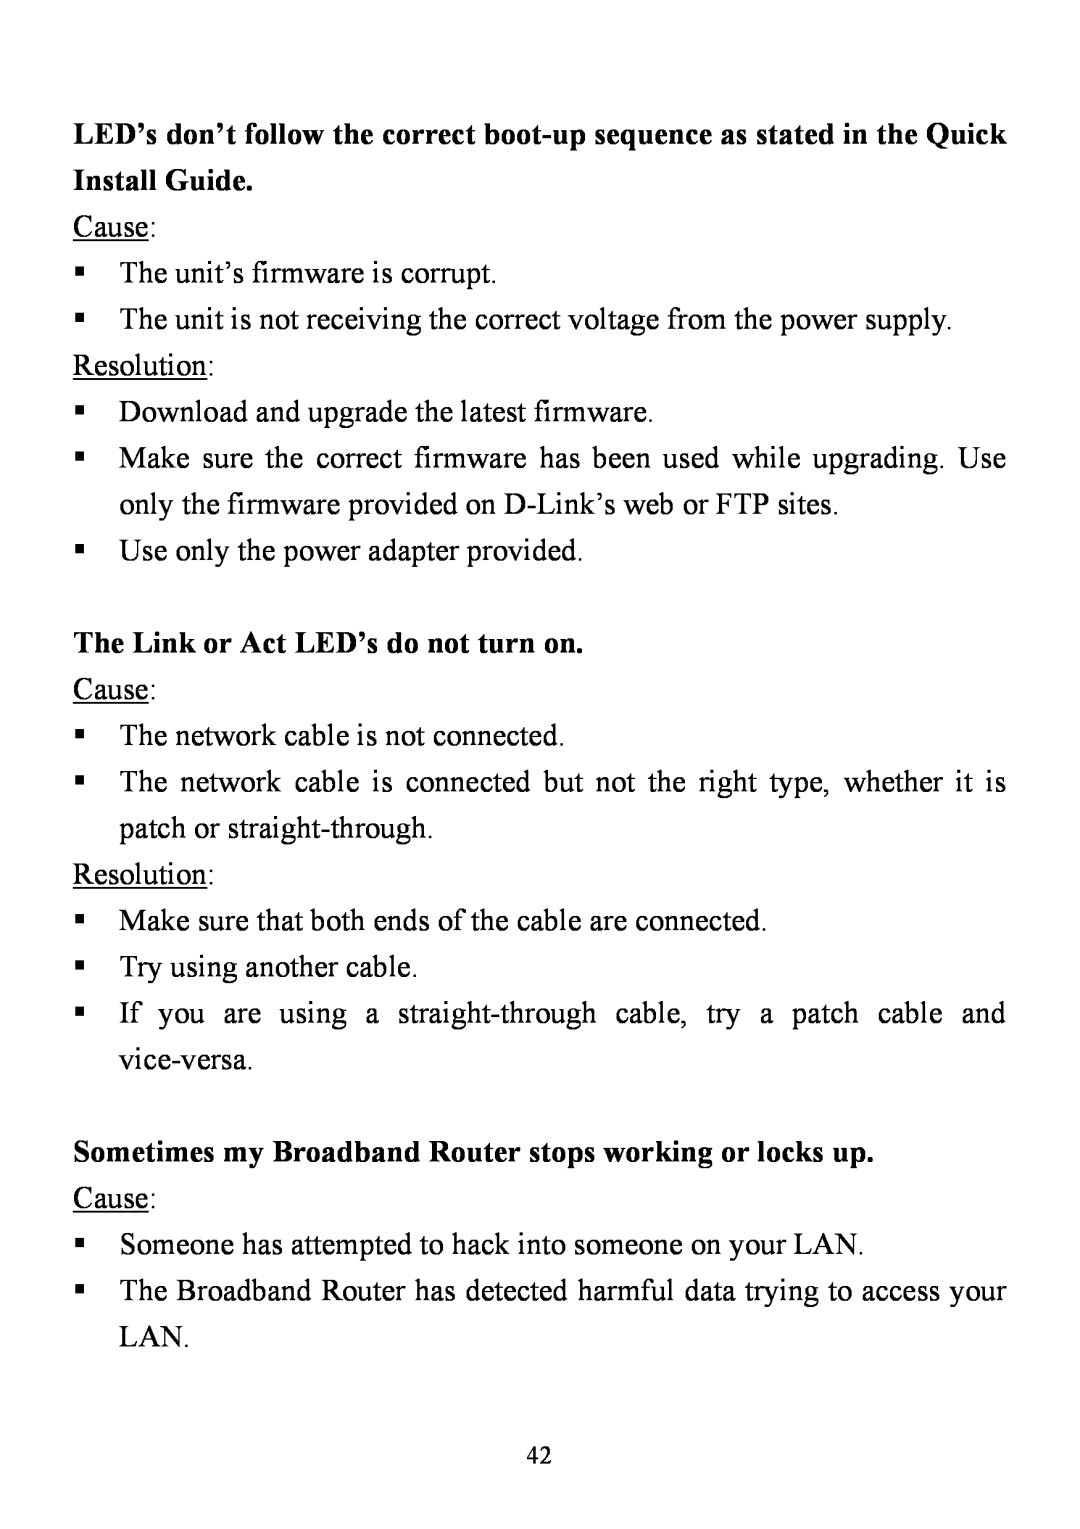 D-Link DI-714 user manual The Link or Act LED’s do not turn on, Sometimes my Broadband Router stops working or locks up 